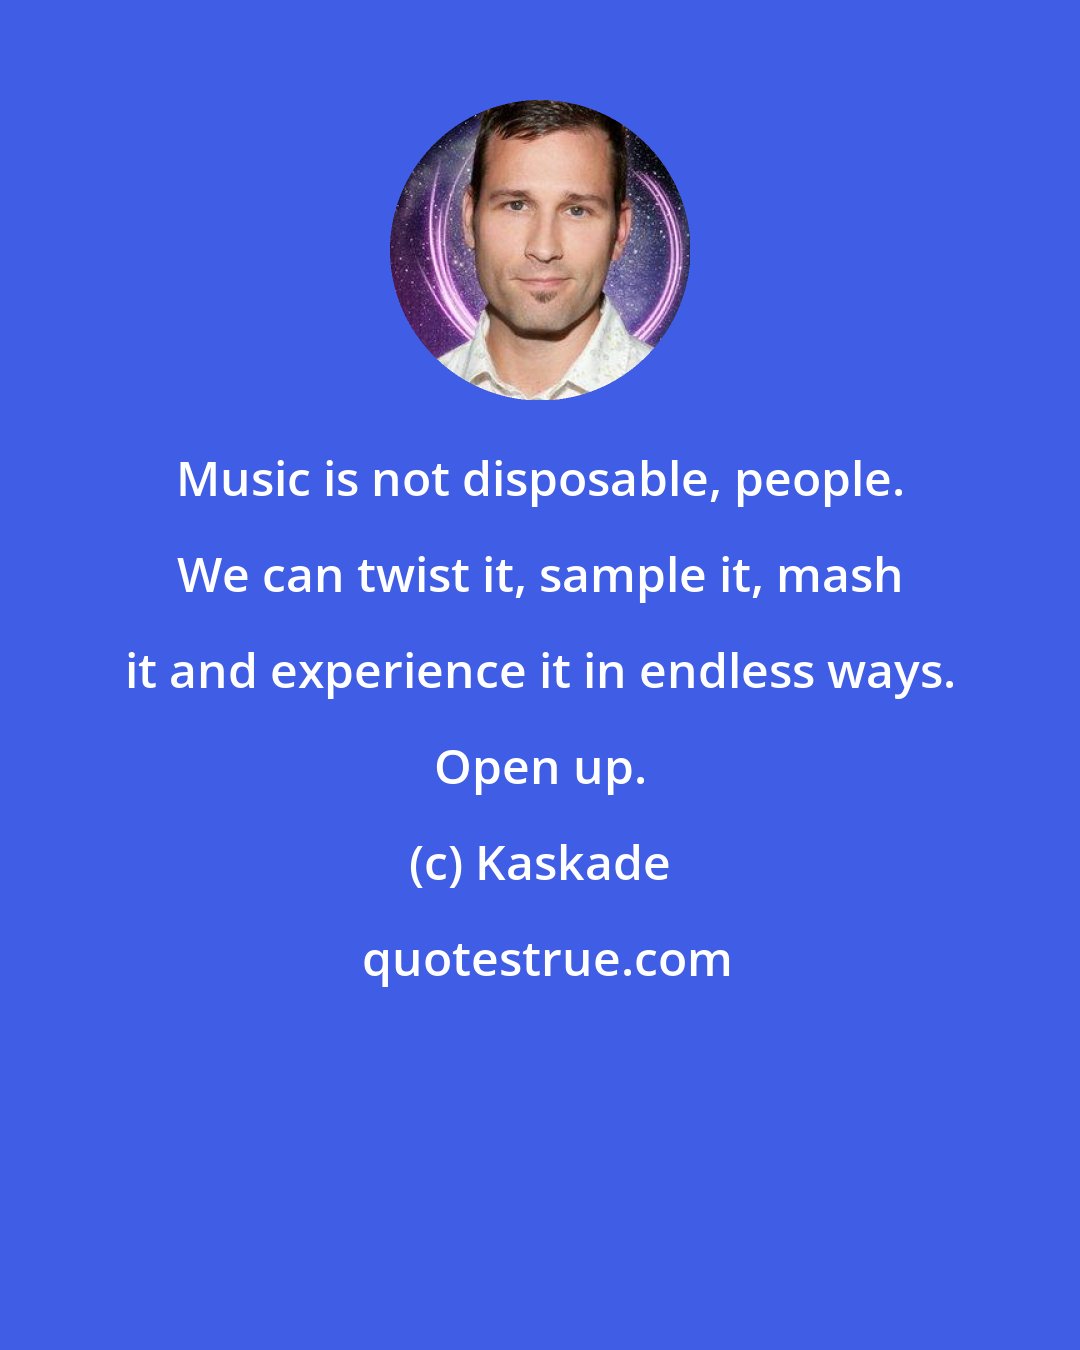 Kaskade: Music is not disposable, people. We can twist it, sample it, mash it and experience it in endless ways. Open up.